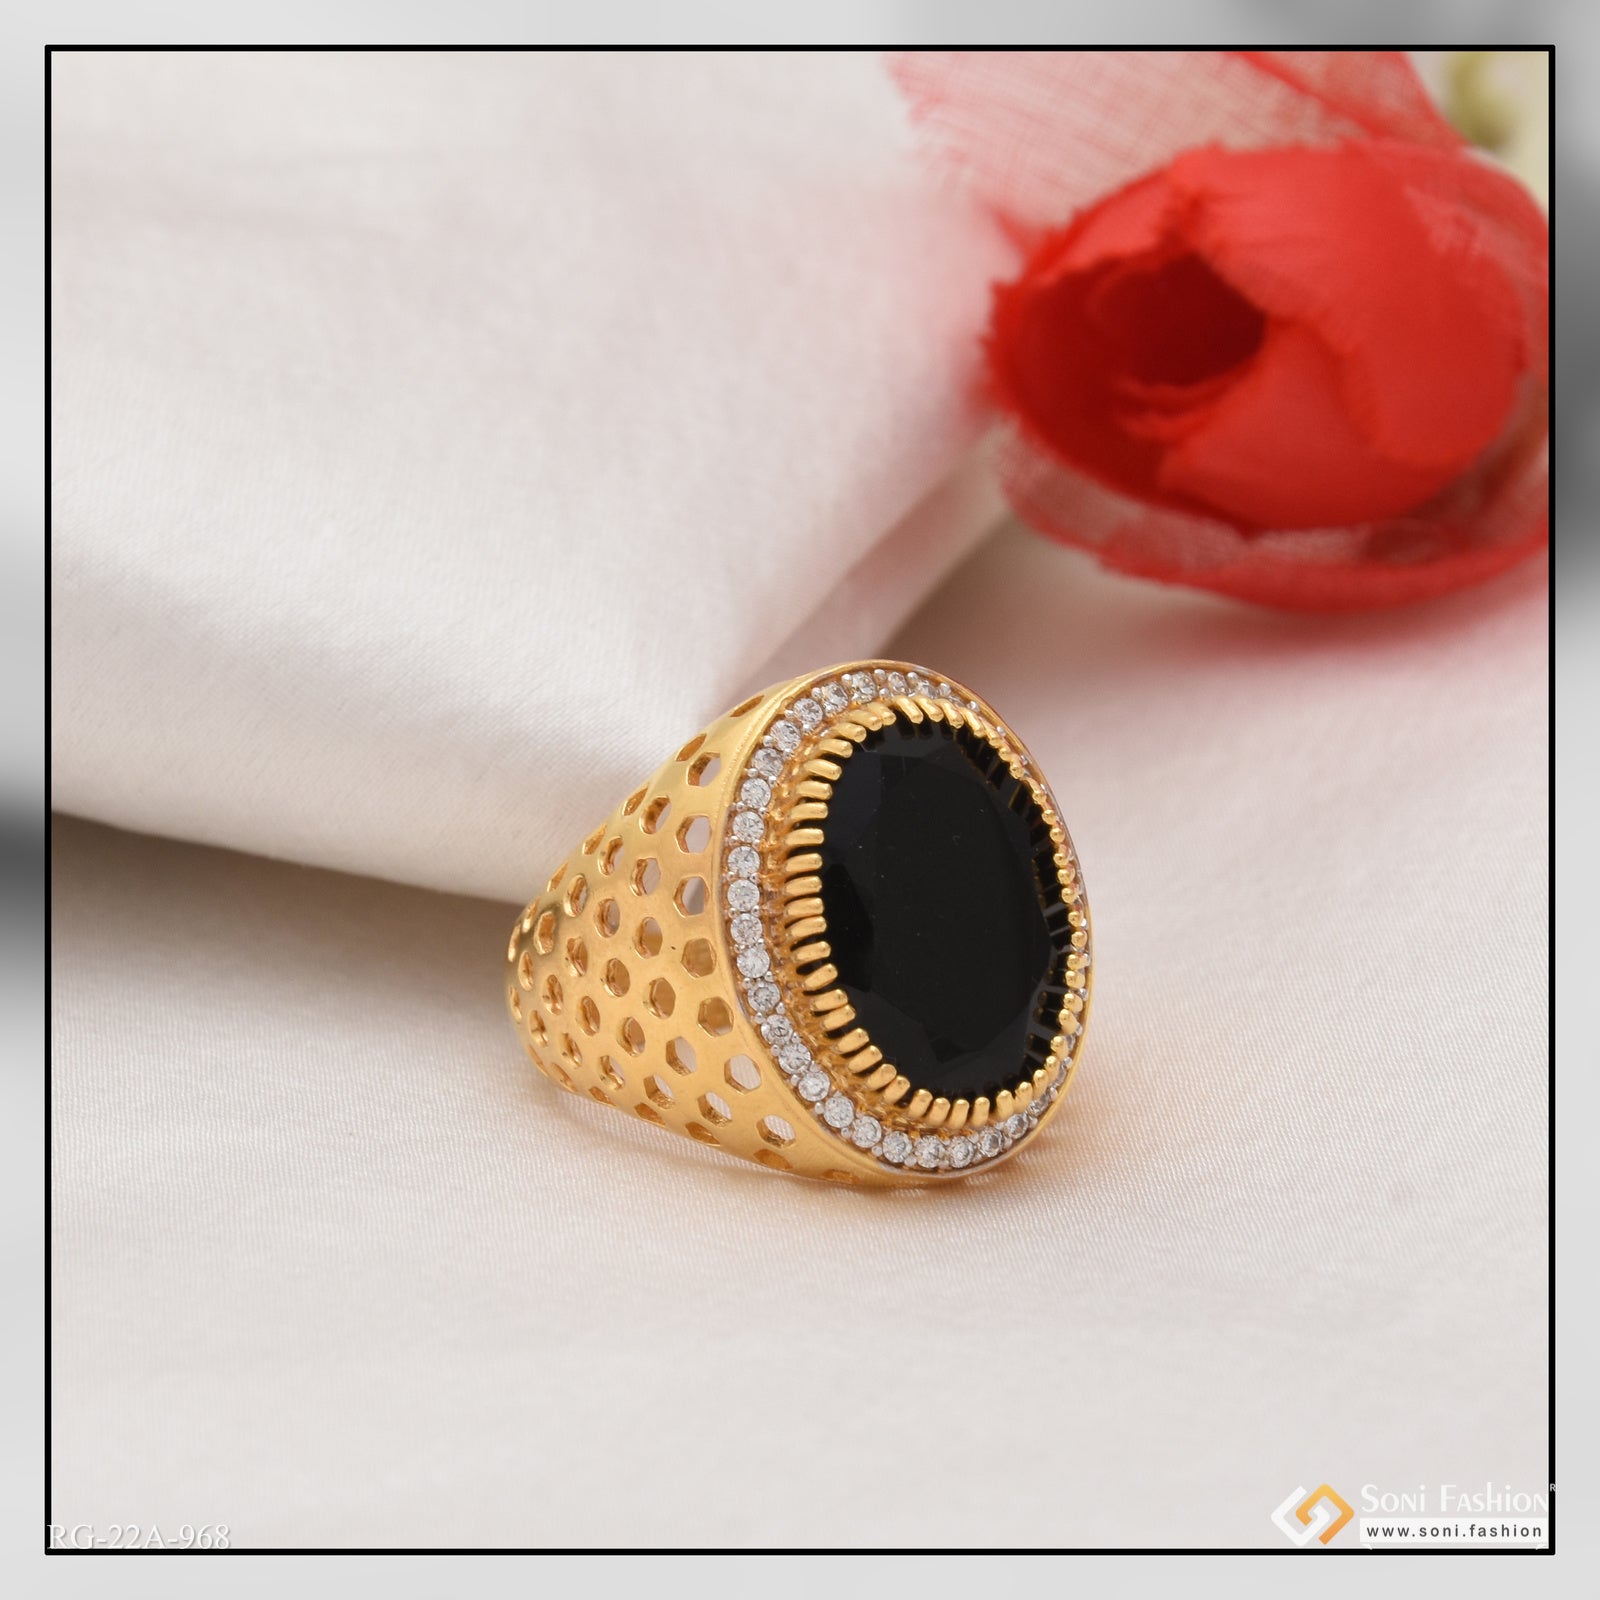 1 Gram Gold Forming Black Stone with Diamond Best Quality Ring - Style A968